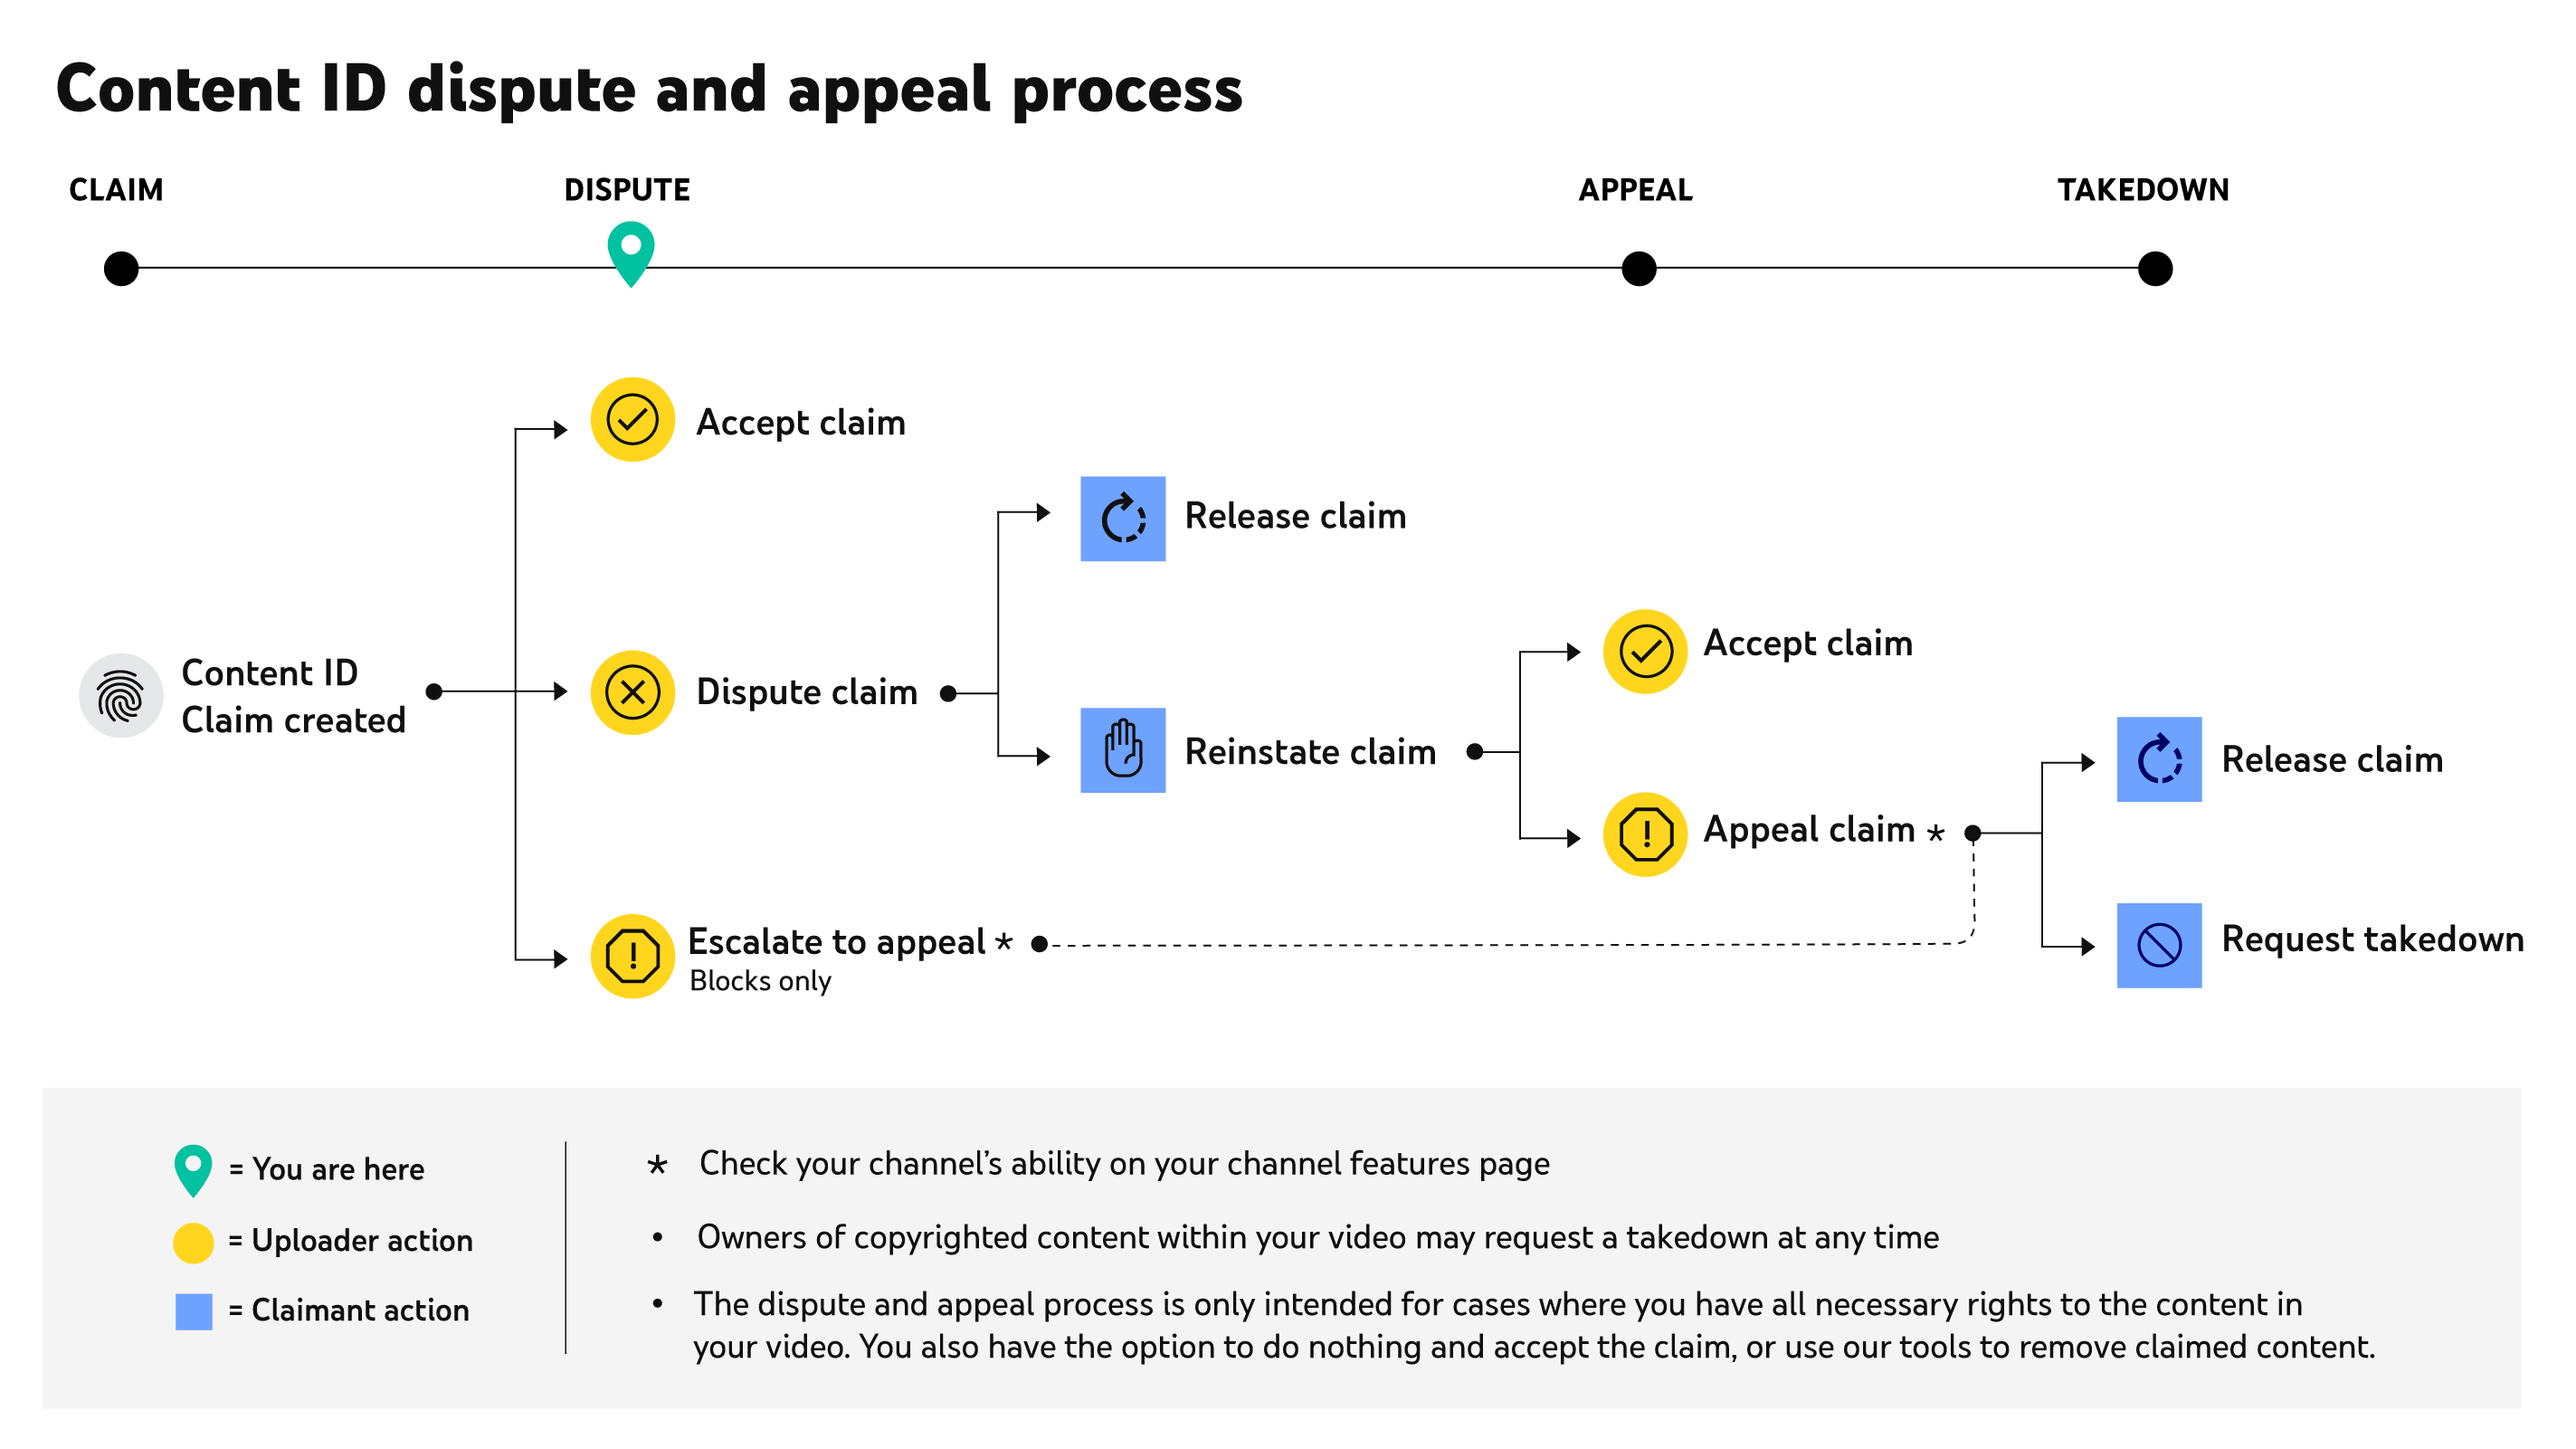 Flow chart showing how to fix a copyright claim on YouTube through the content ID dispute and appeal process.